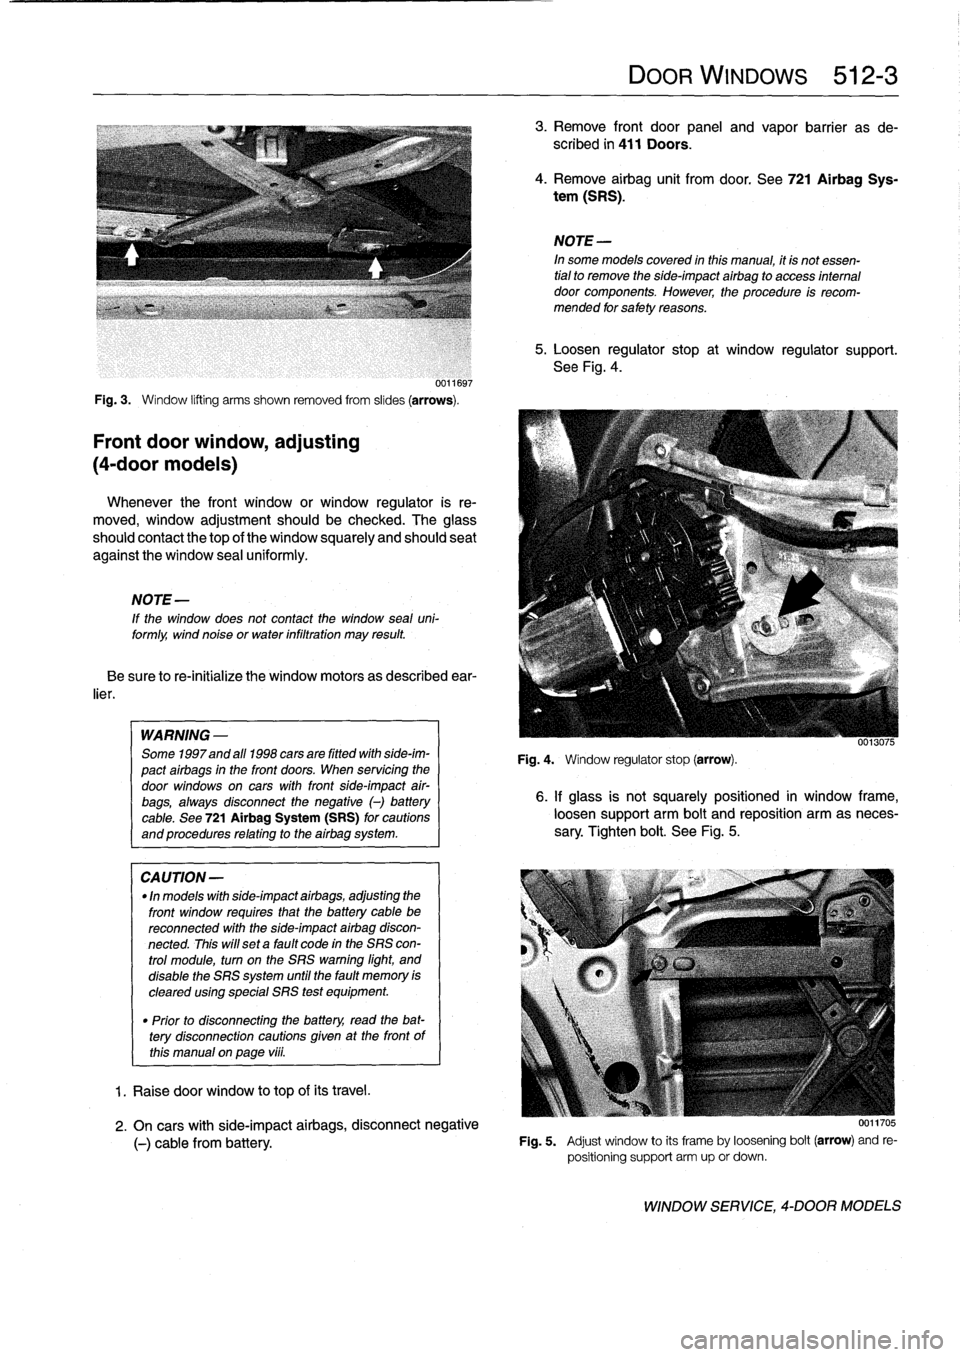 BMW M3 1996 E36 Workshop Manual 
0011697

Fig
.
3
.

	

Window
lifting
arms
shown
removed
from
slides
(arrows)
.

Front
door
window,
adjusting

(4-door
models)

Whenever
the
front
window
or
window
regulator
is
re-

moved,
window
adj